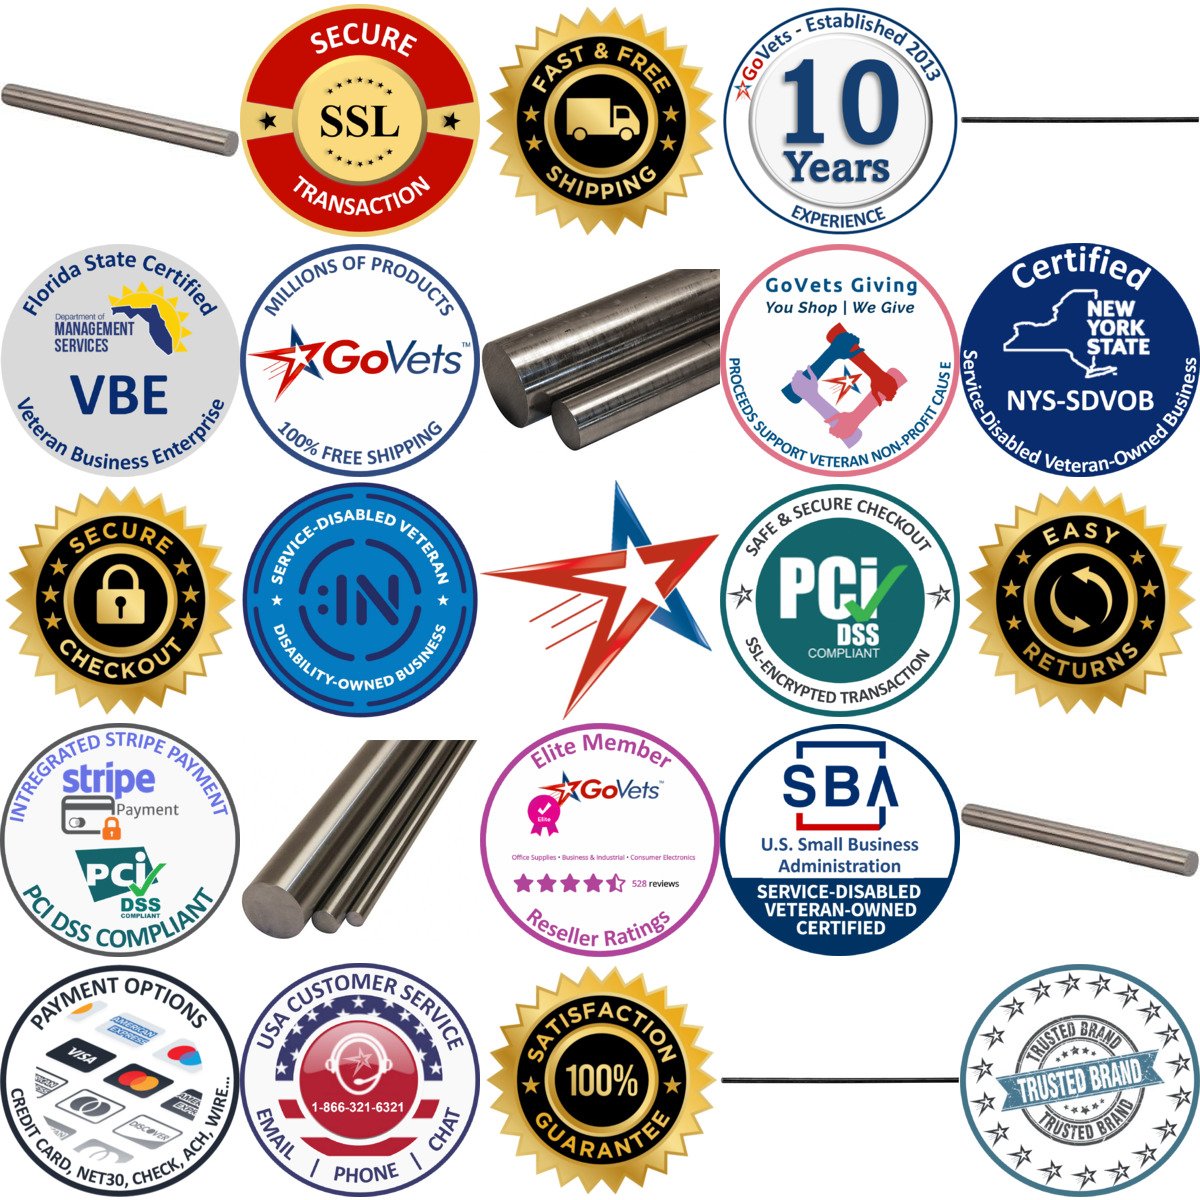 A selection of Stainless Steel Round Rods products on GoVets